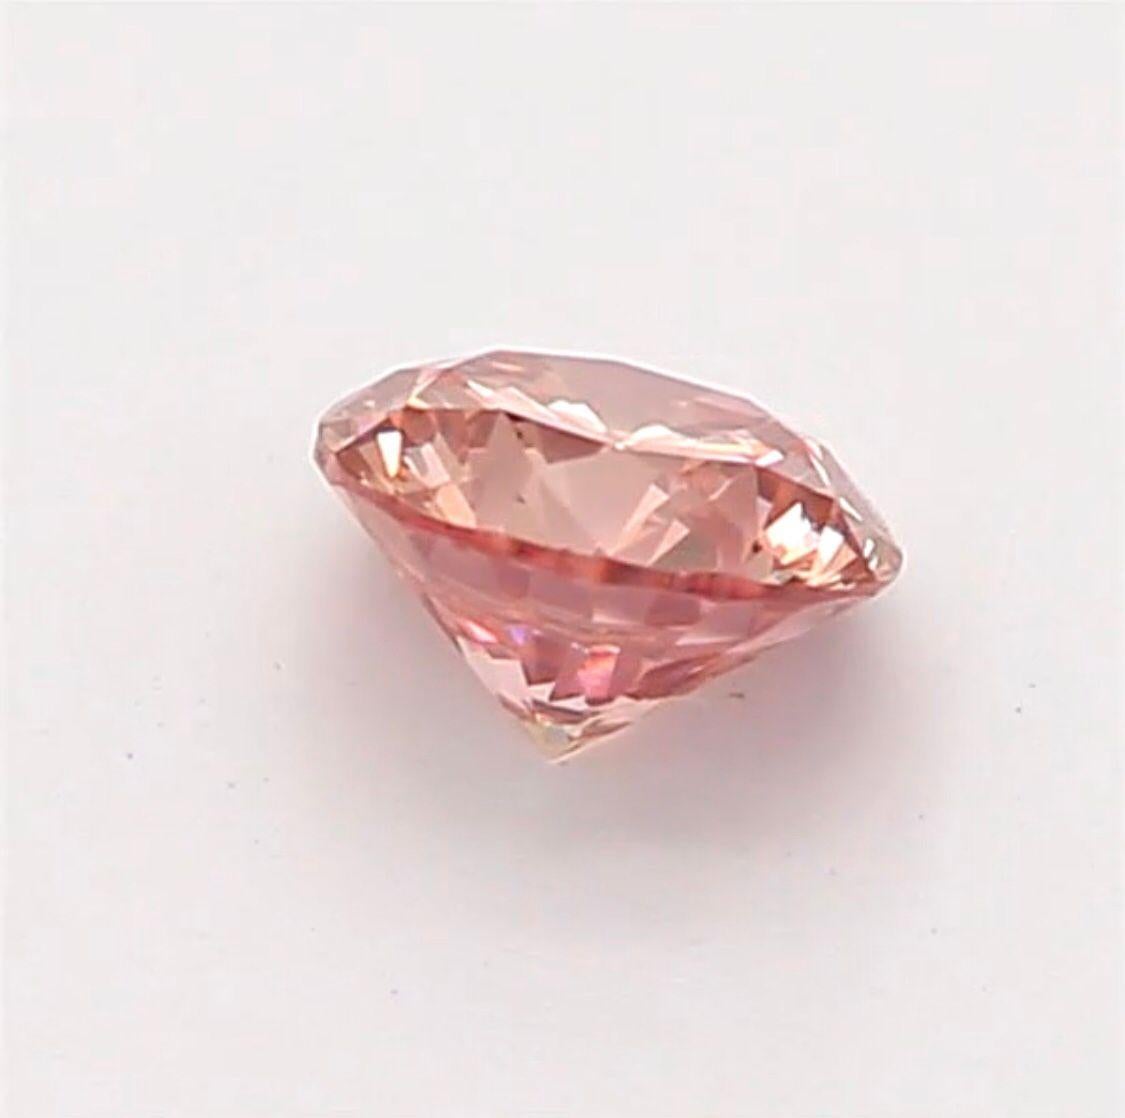 Women's or Men's 0.15 Carat Fancy Orangy Pink Round Shaped Diamond SI2 Clarity CGL Certified For Sale